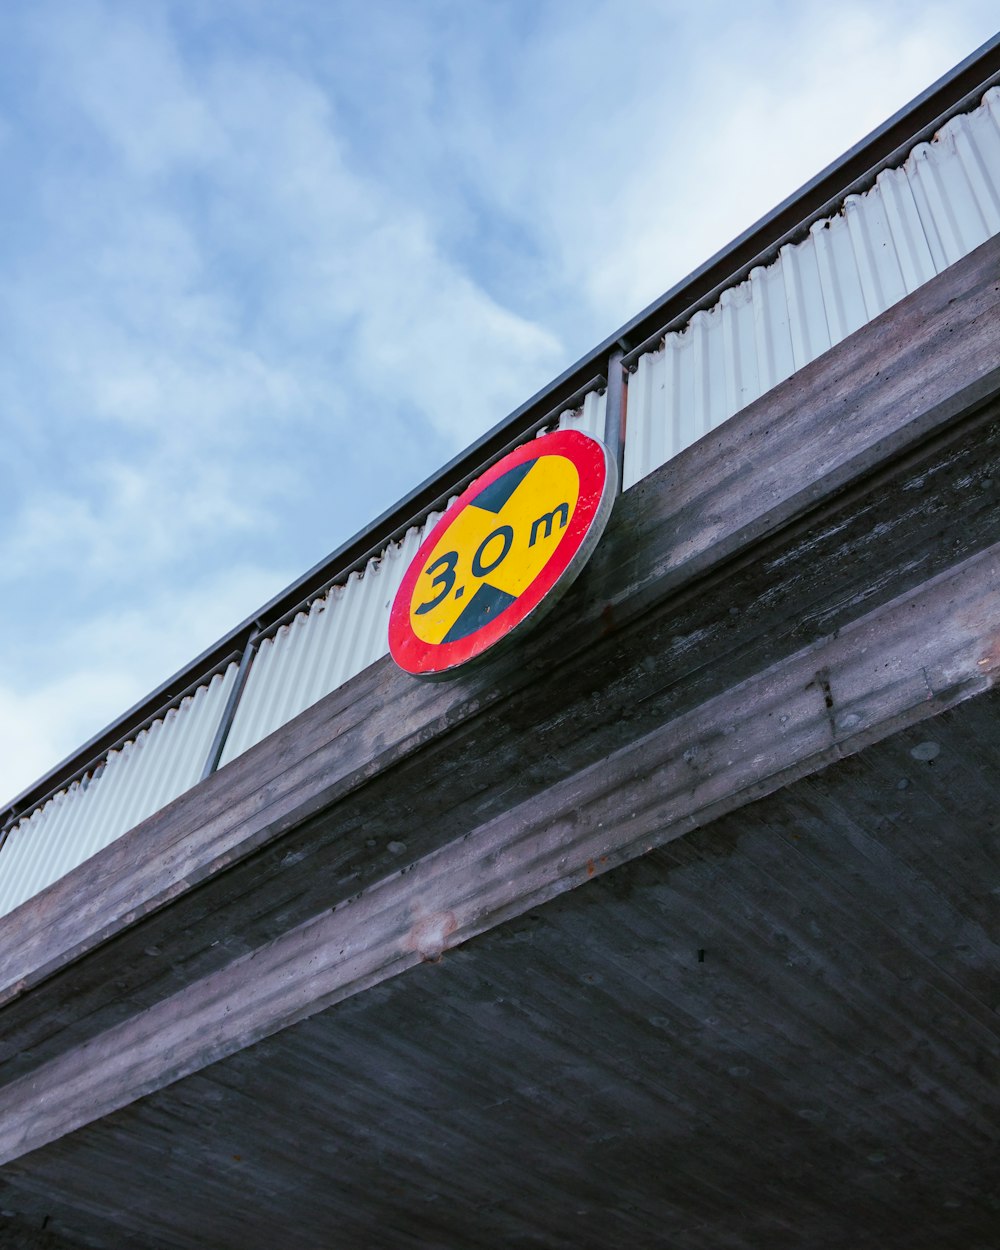 a red and yellow sign on the side of a bridge